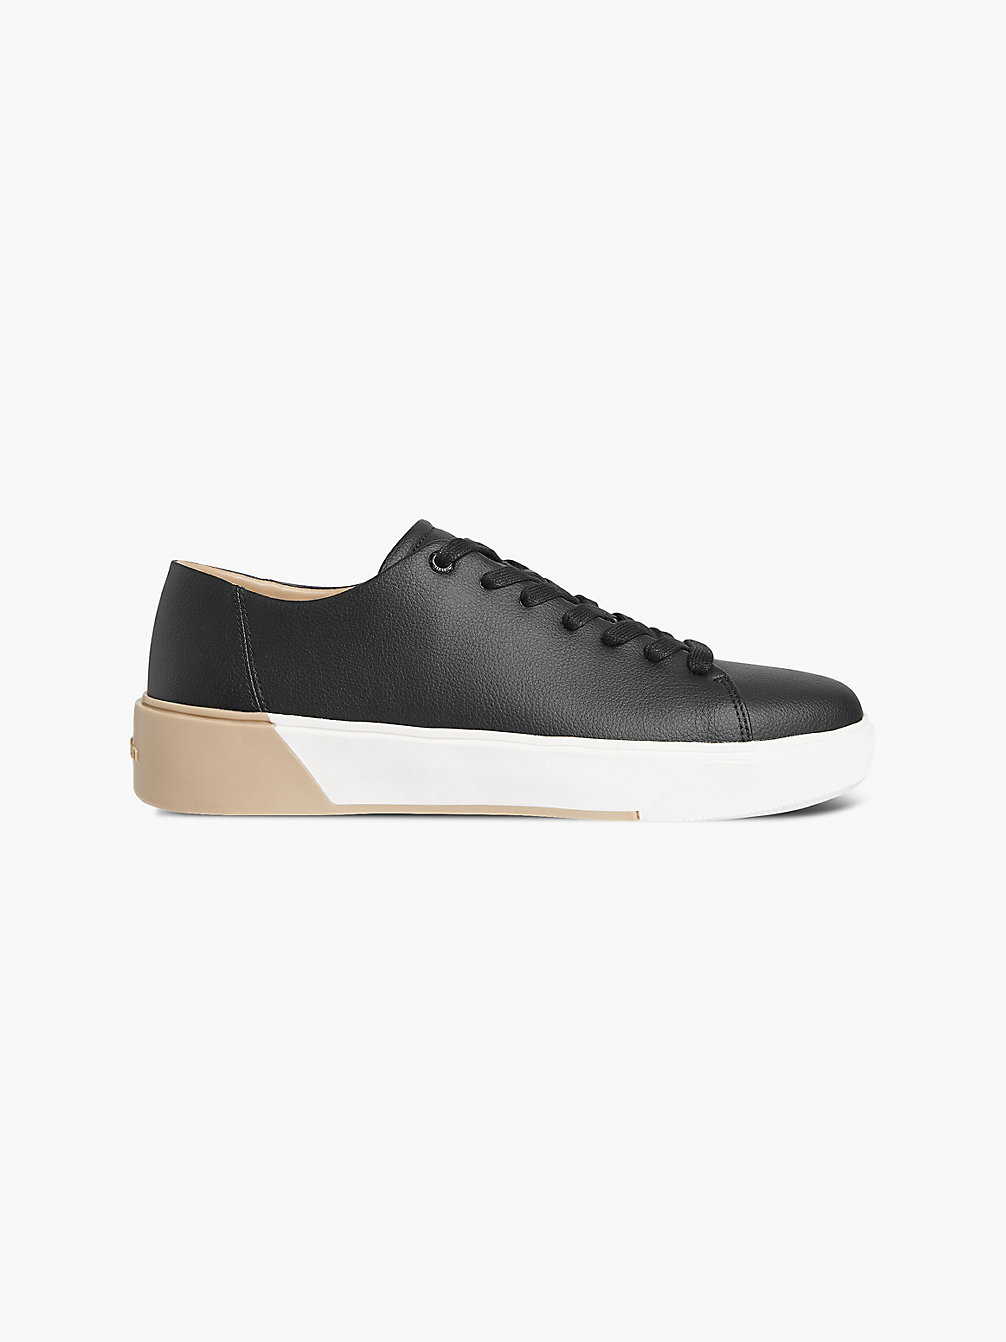 PVH BLACK Recycled Vegan Leather Trainers undefined men Calvin Klein